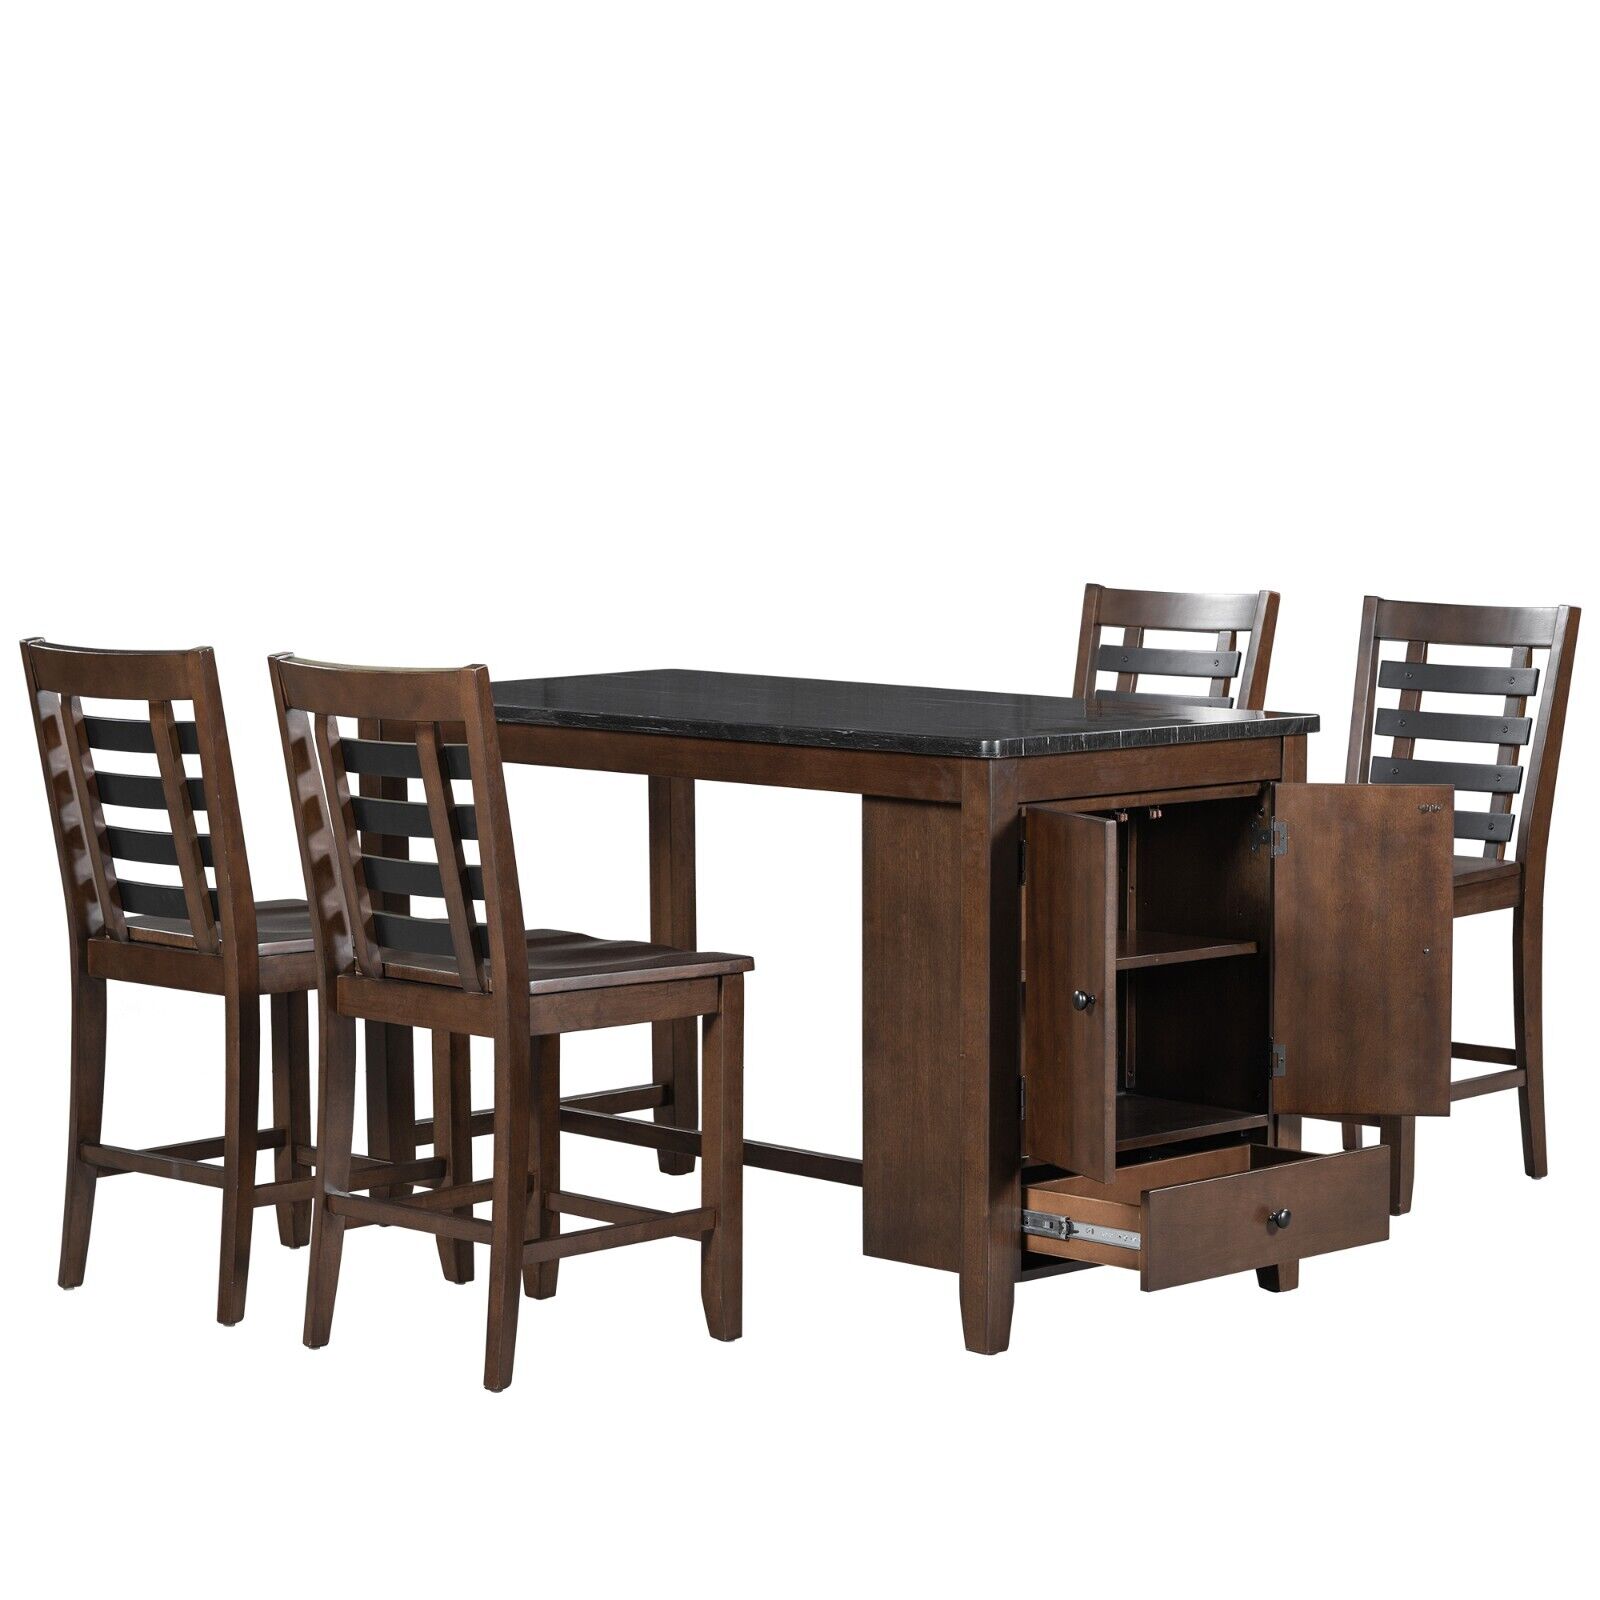 5-piece Solid Wood Dining Table Set W/ Marble Tabletop with Storage Cabinet